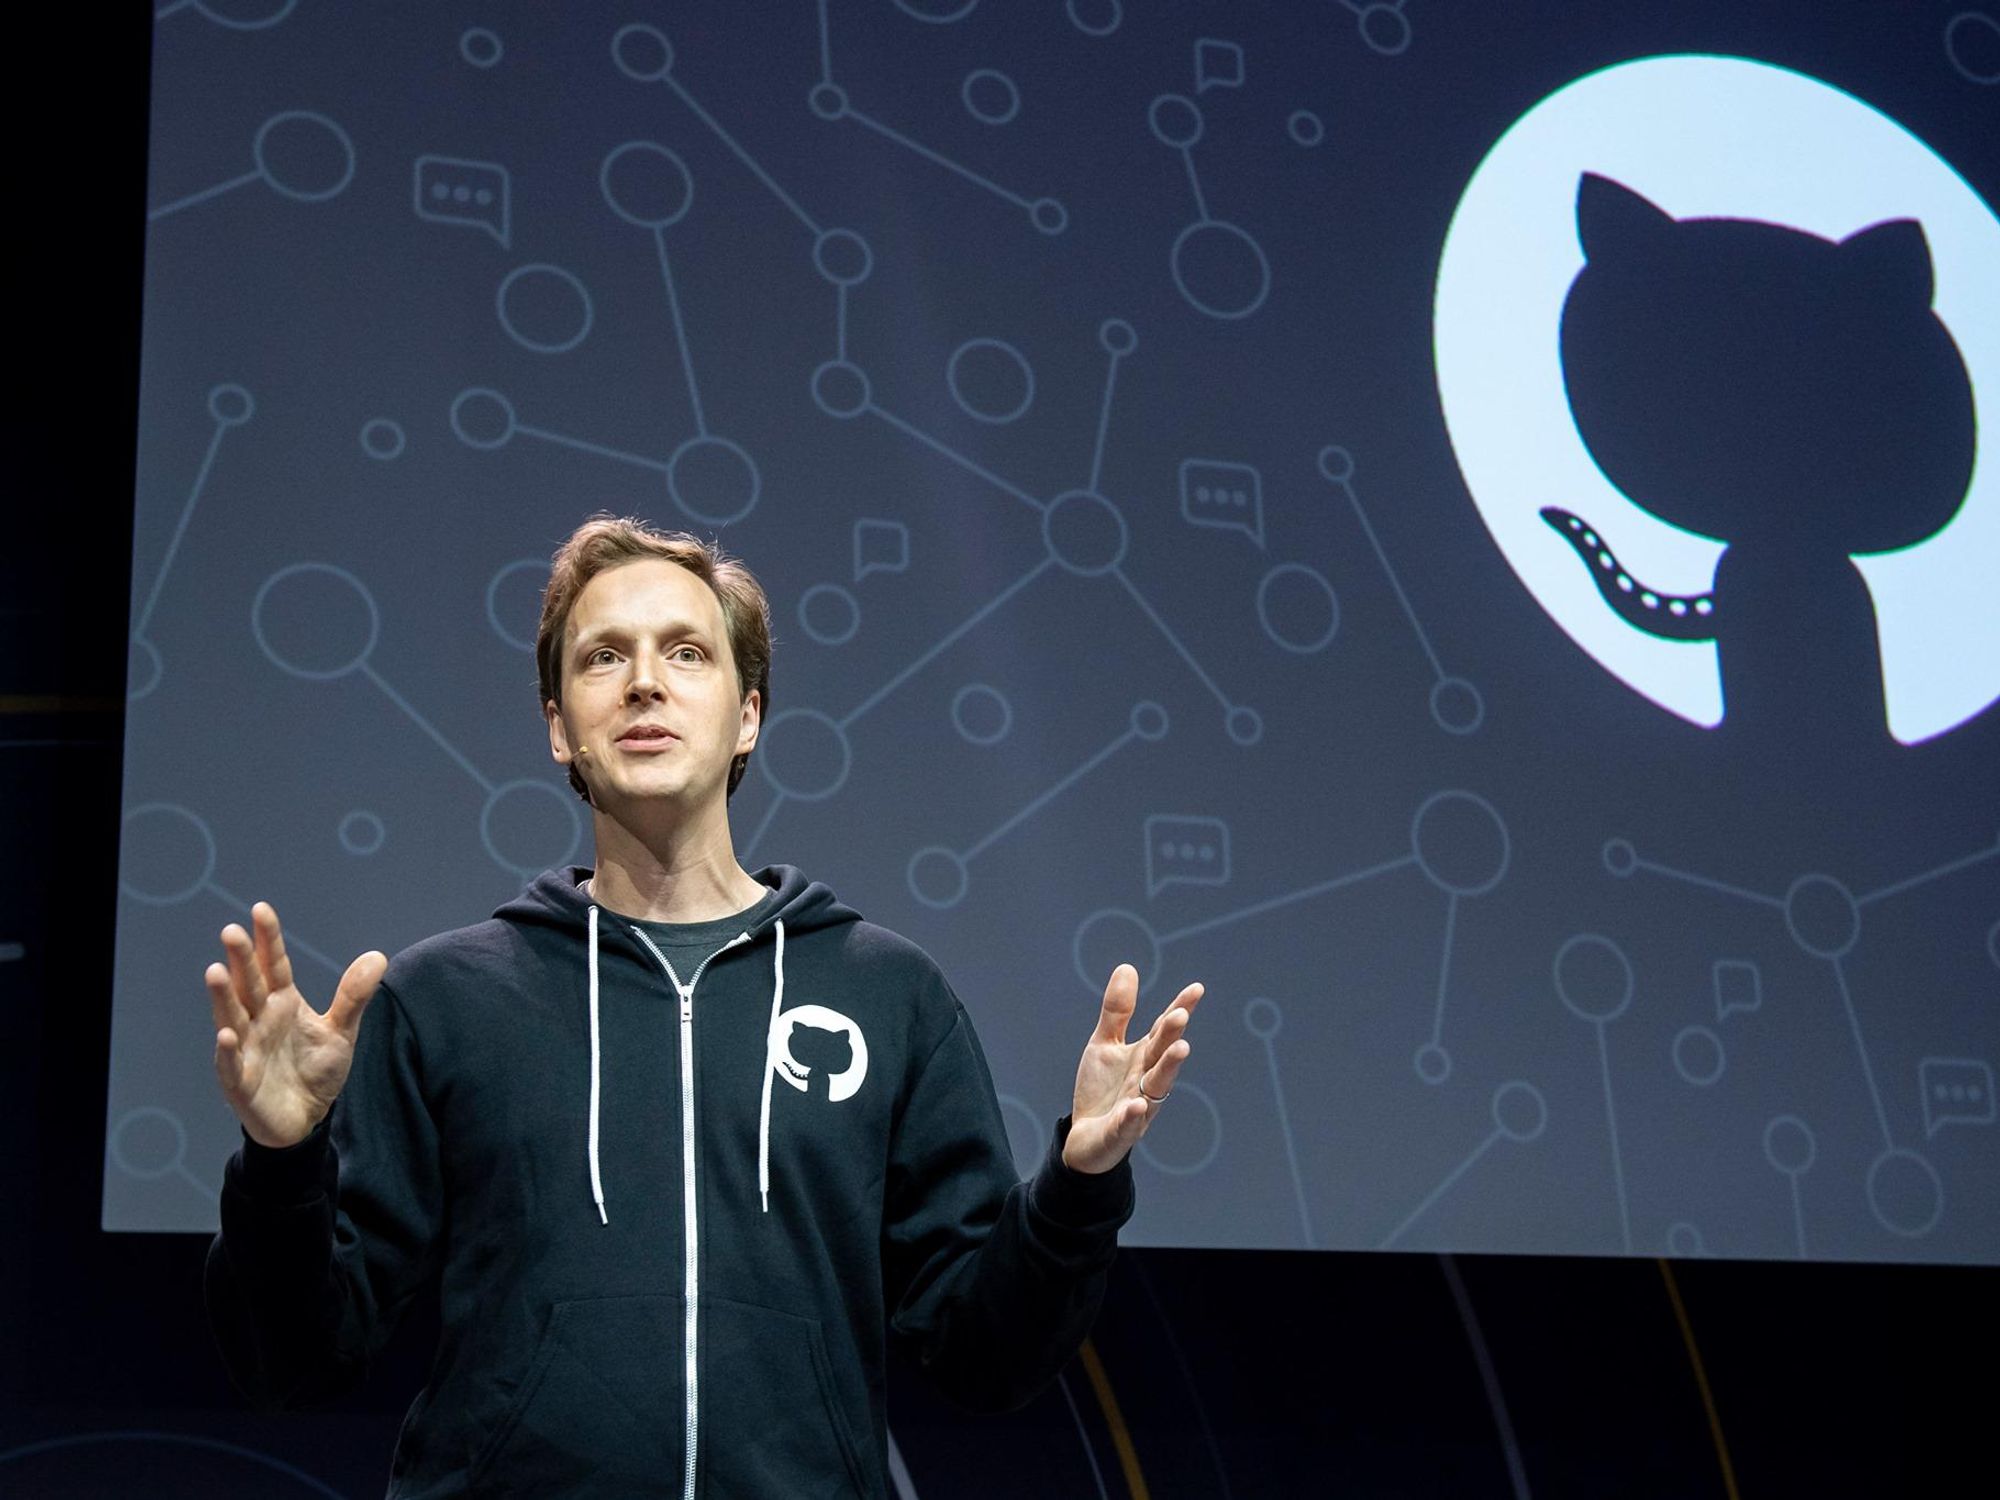 GitHub has seen steady growth since it was founded in 2008.